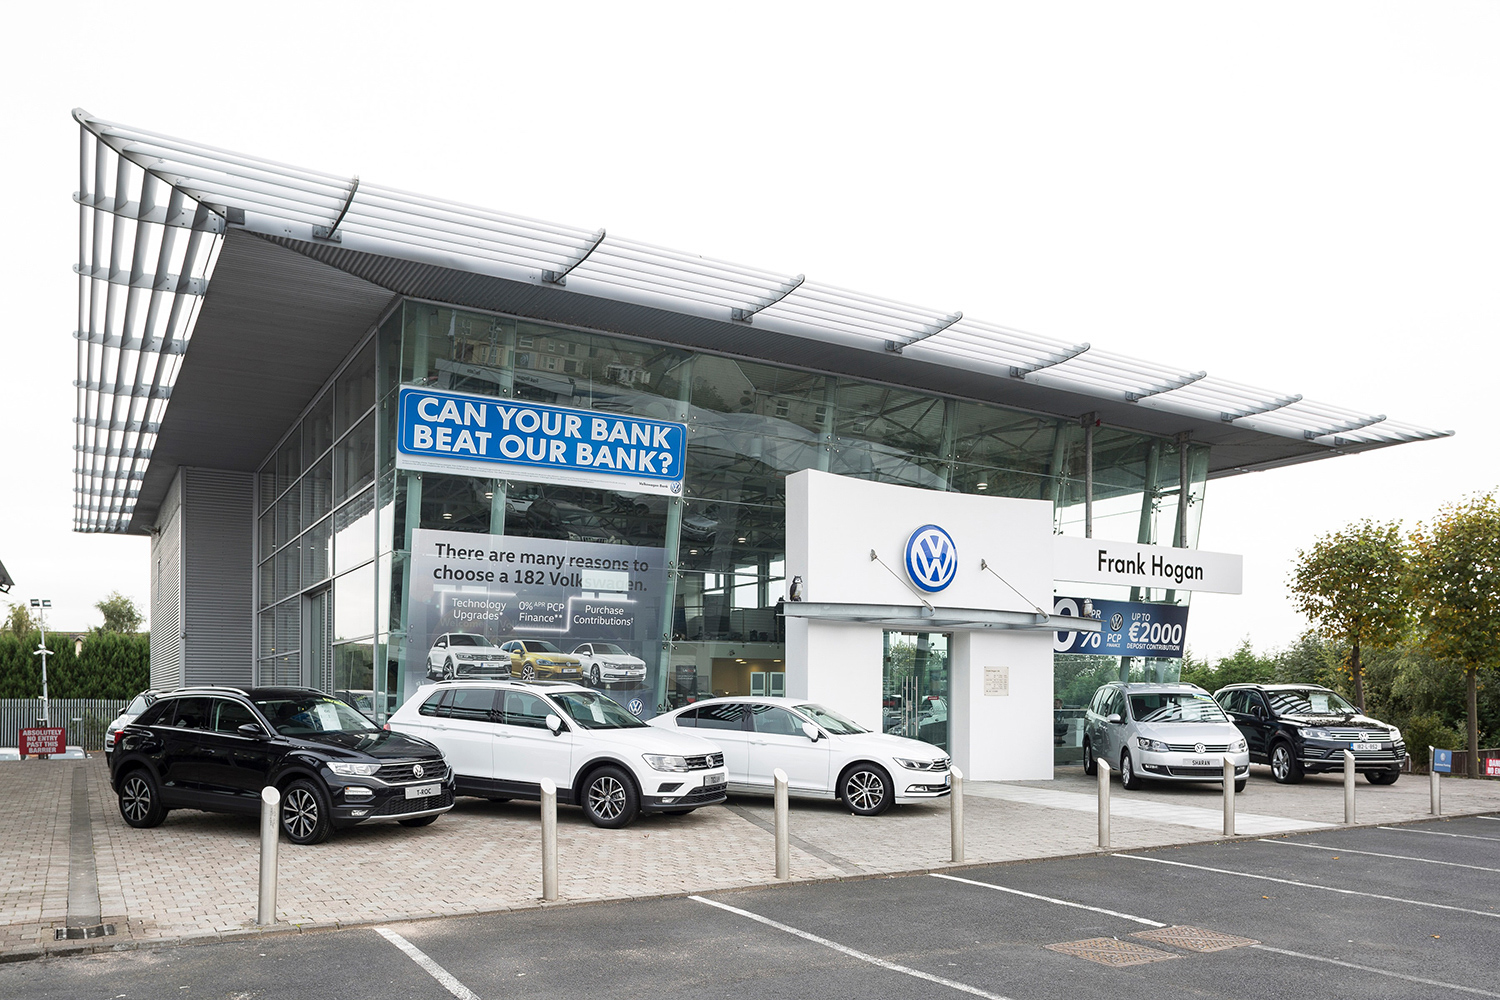 Car Industry News | Hogan and Sheehy win joint Volkswagen dealer award | CompleteCar.ie